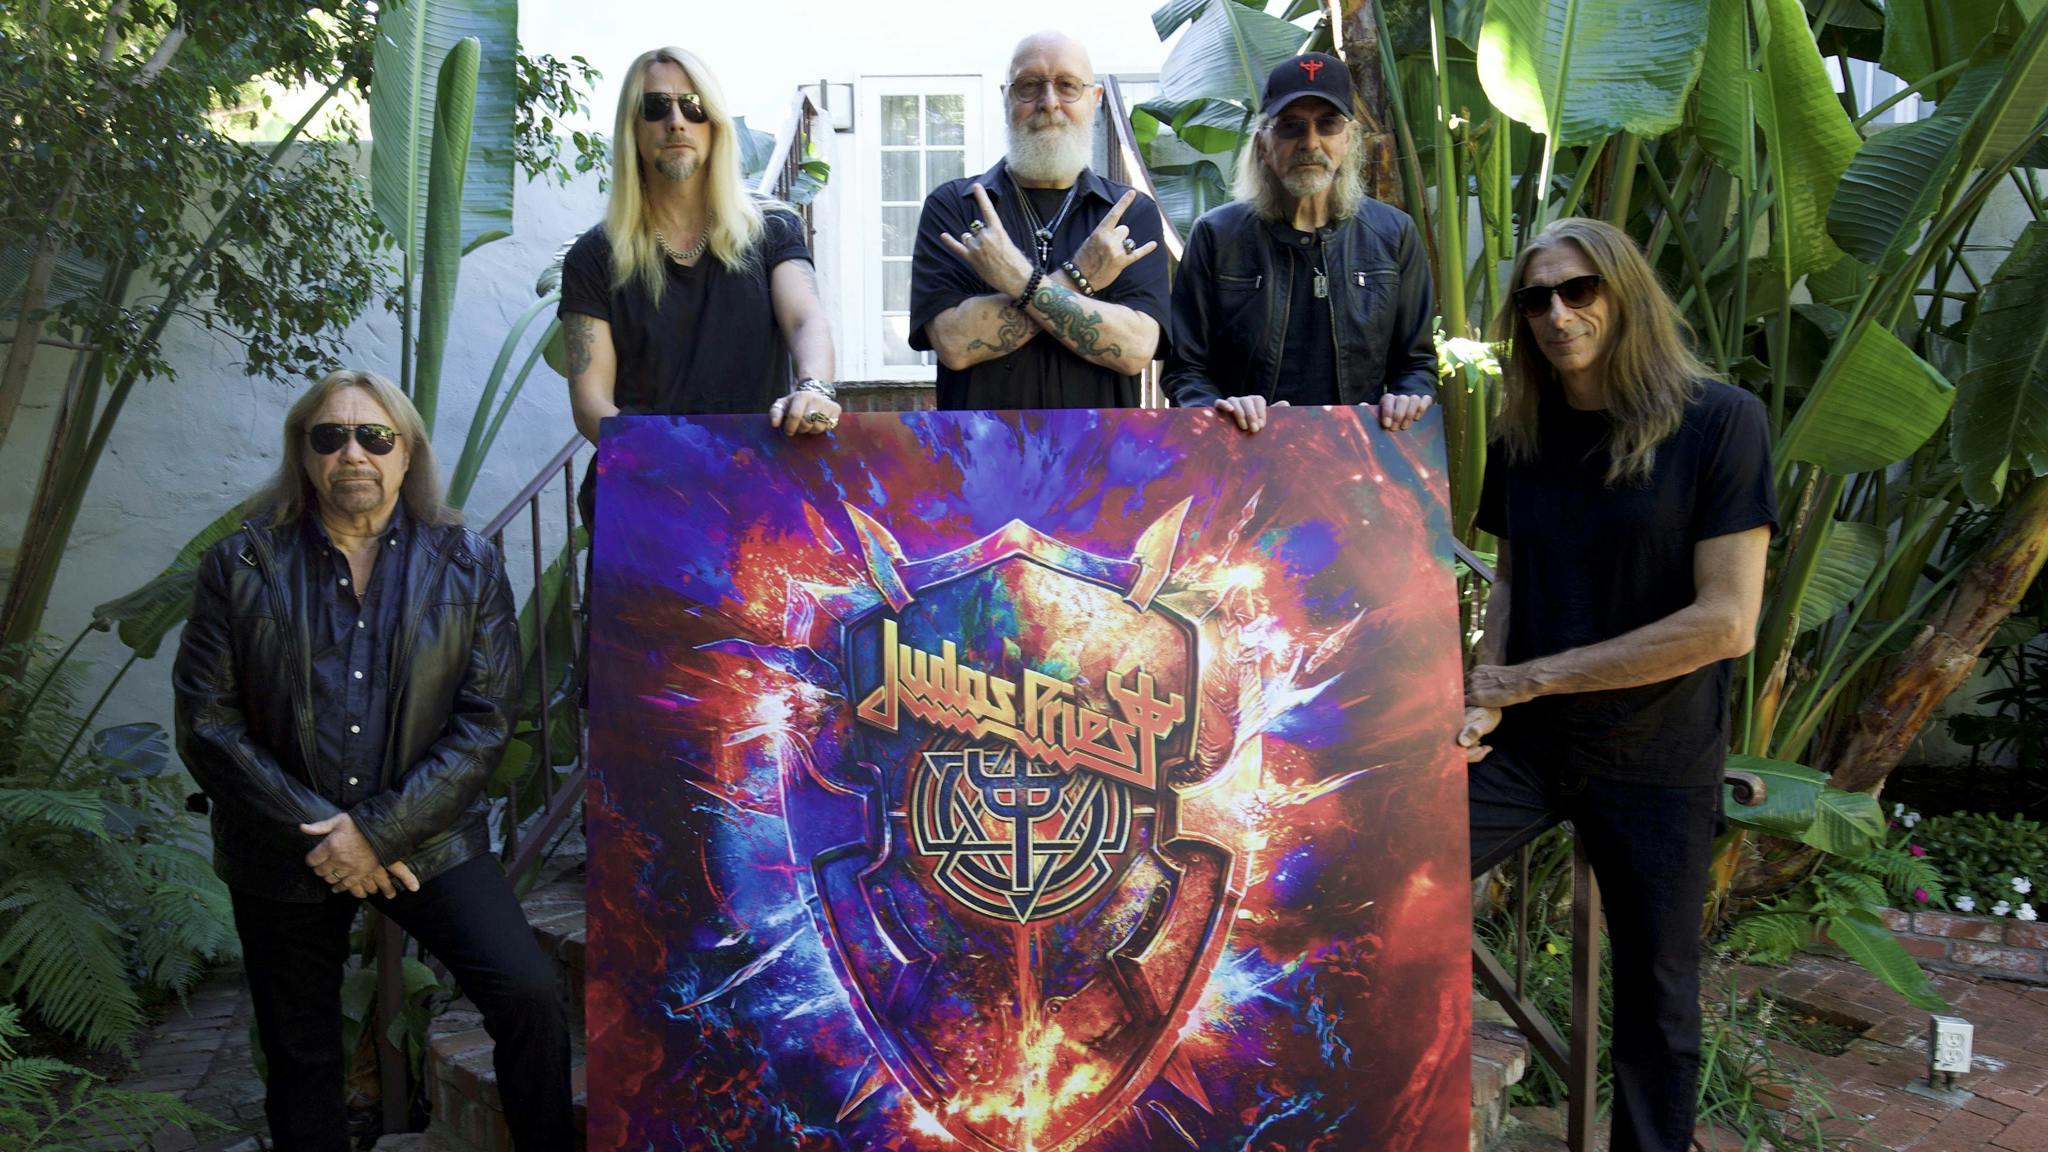 Judas Priest unleash the first single from their upcoming 19th album